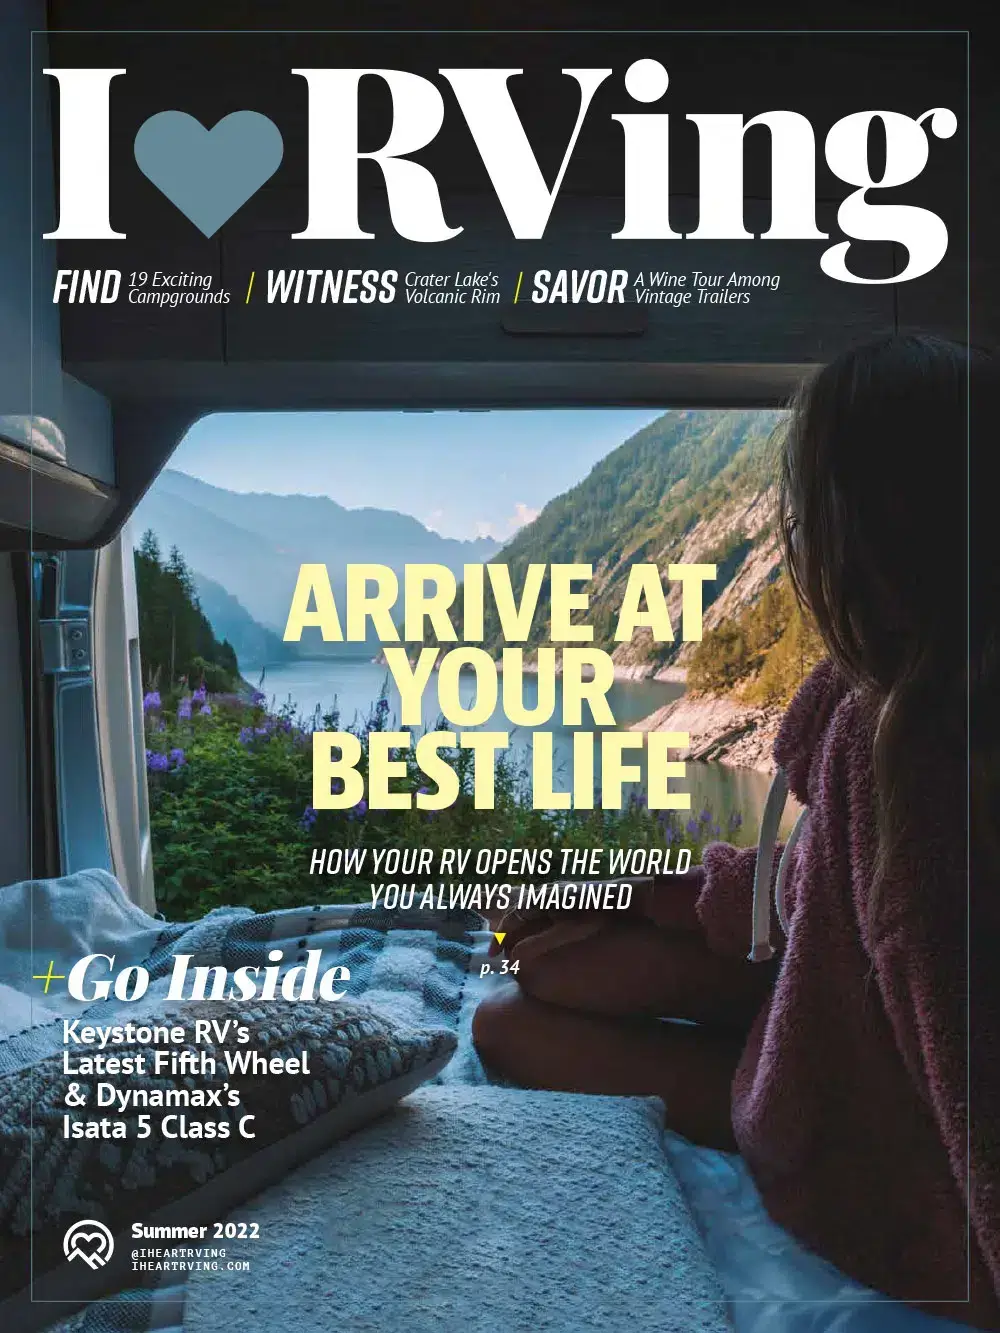 RV magazine cover, nature view, travel lifestyle concept.